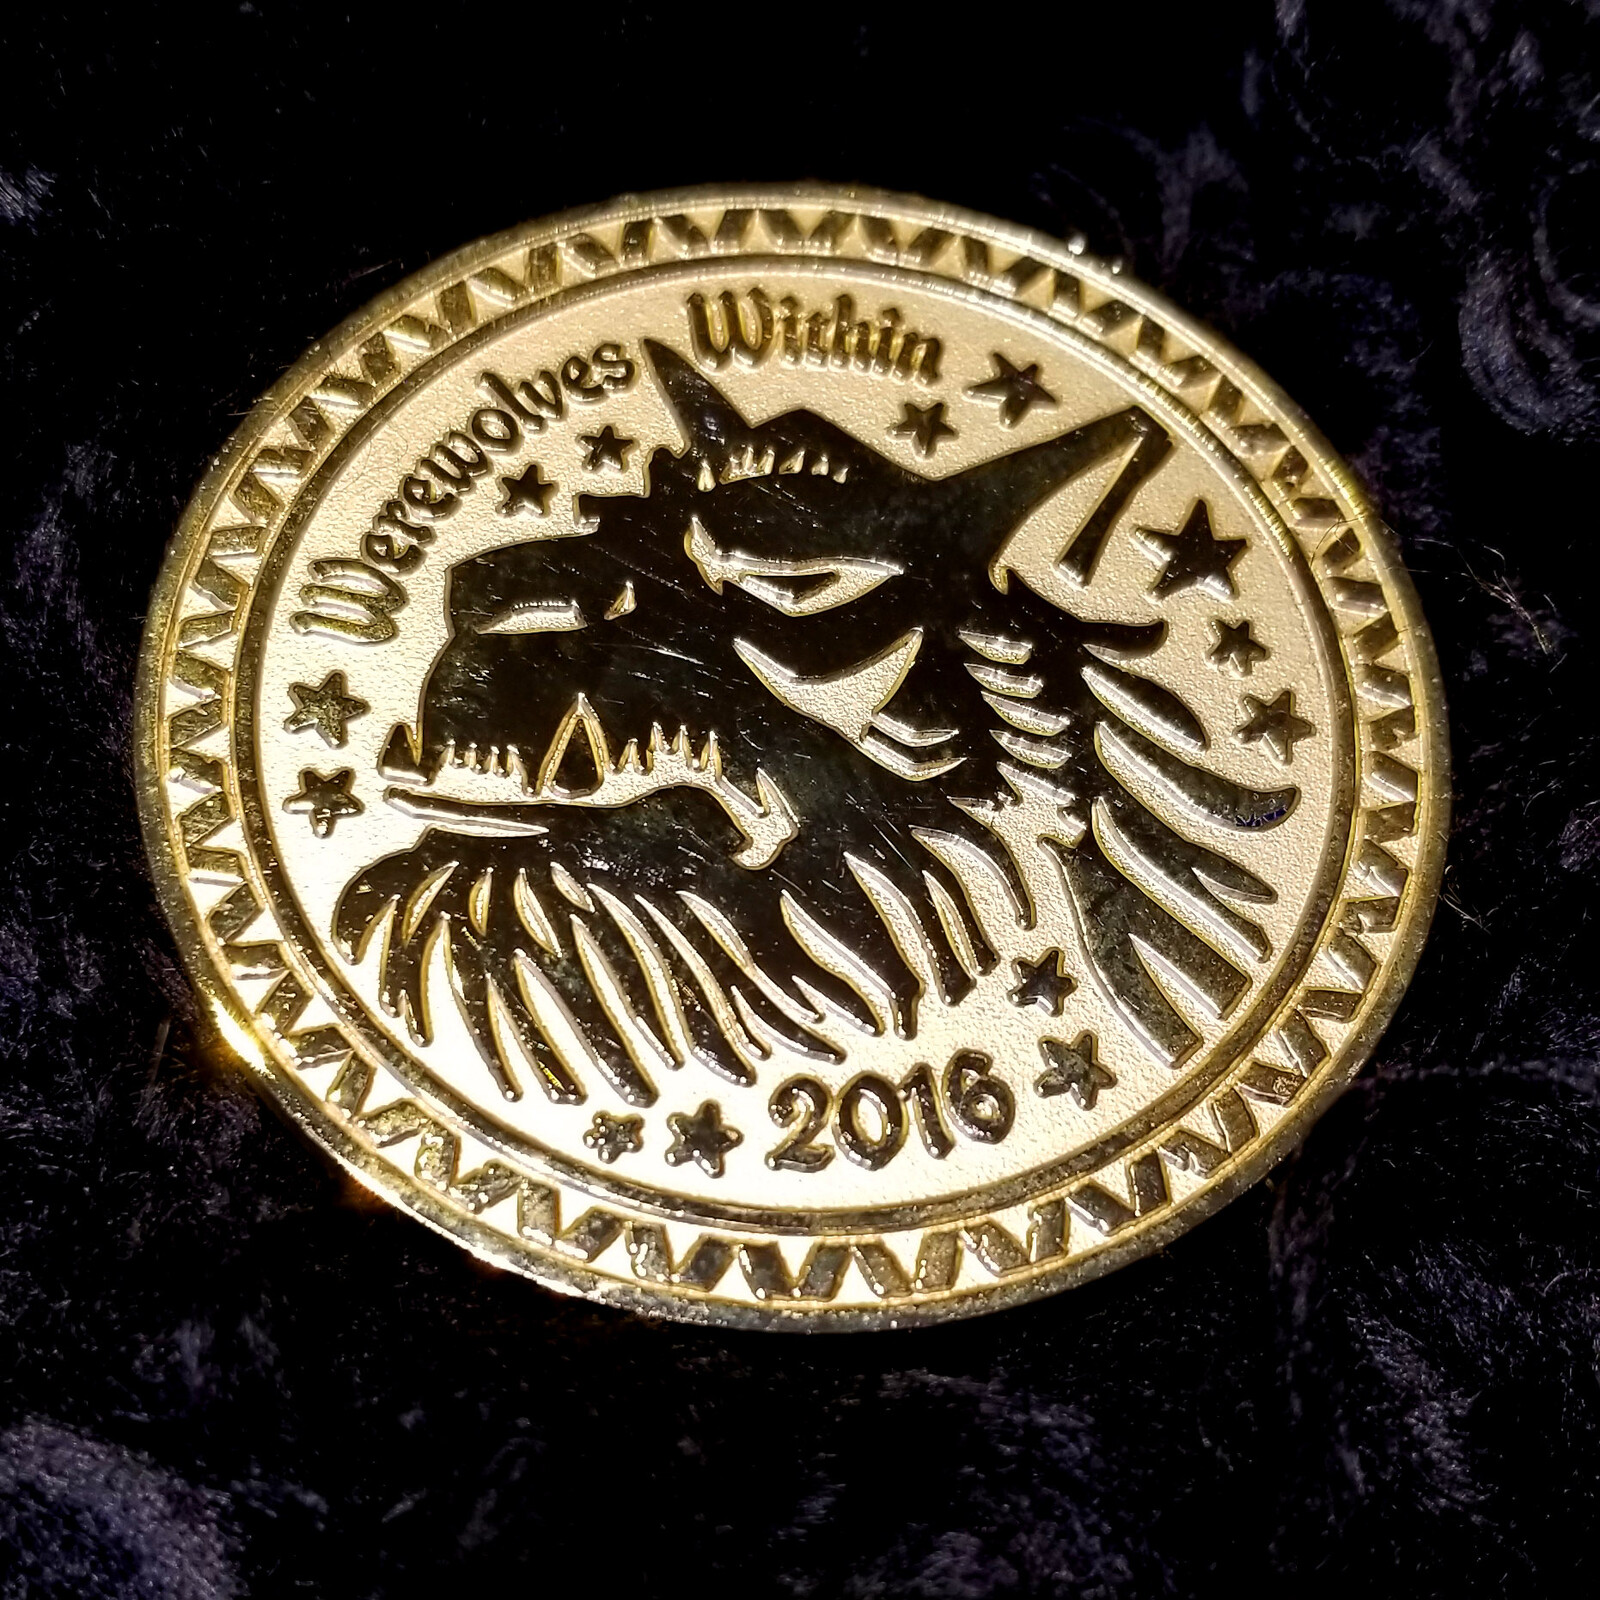 Final coin, wolf side up.